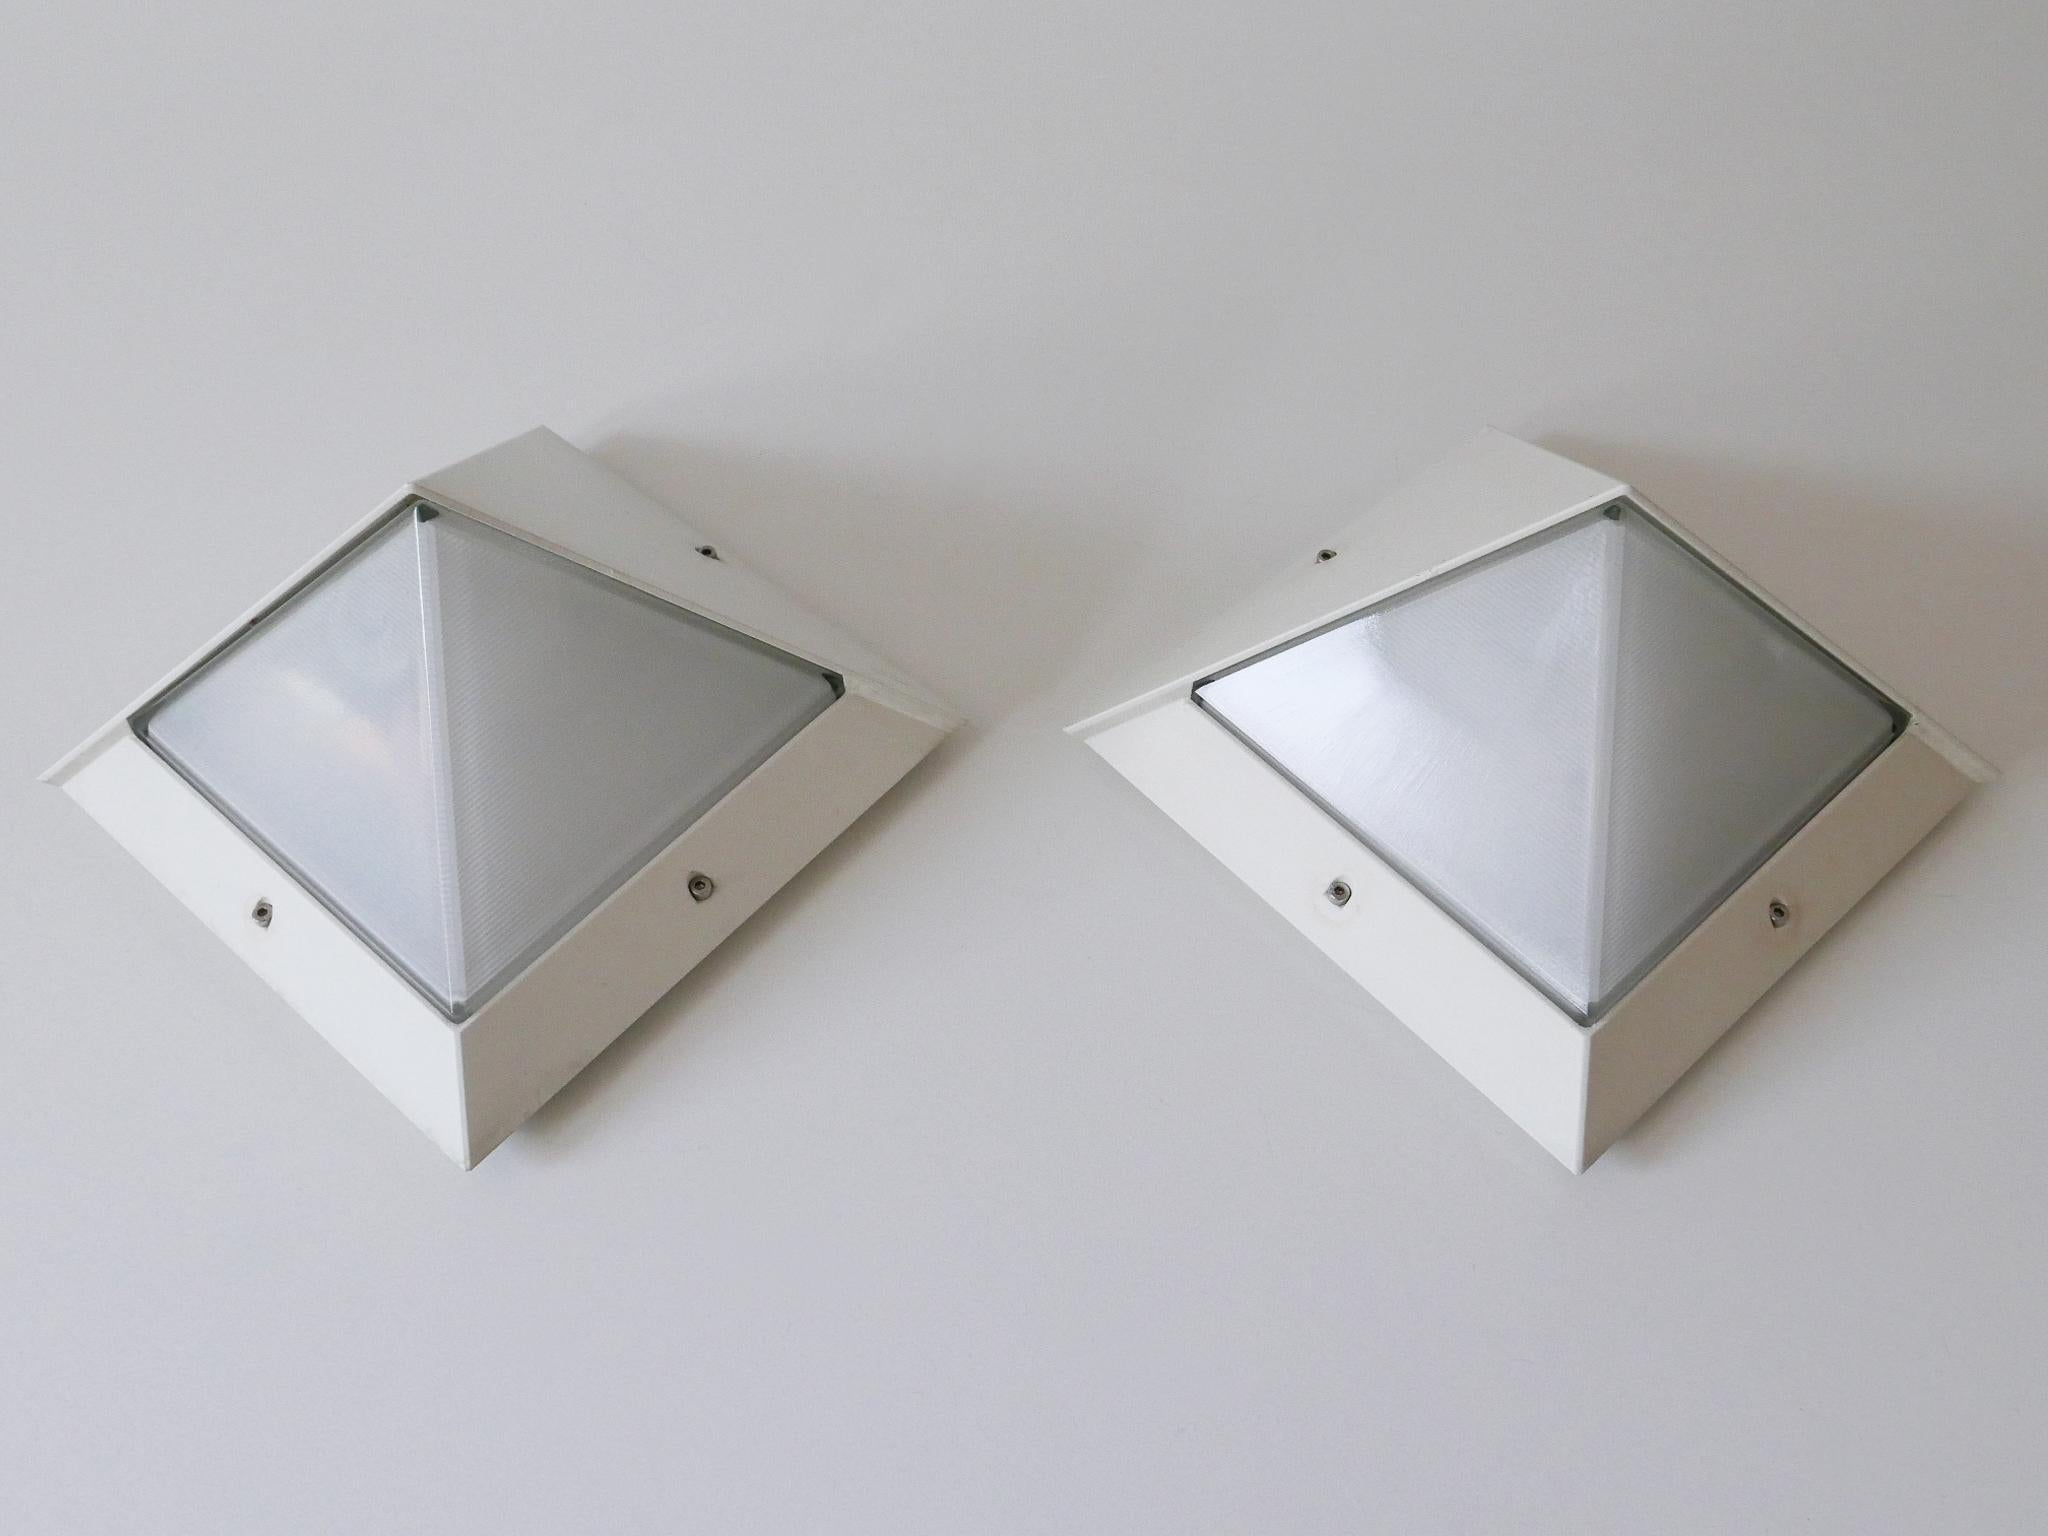 Set of Two Medium Outdoor Wall Lamps or Sconces by BEGA, 1980s, Germany For Sale 3